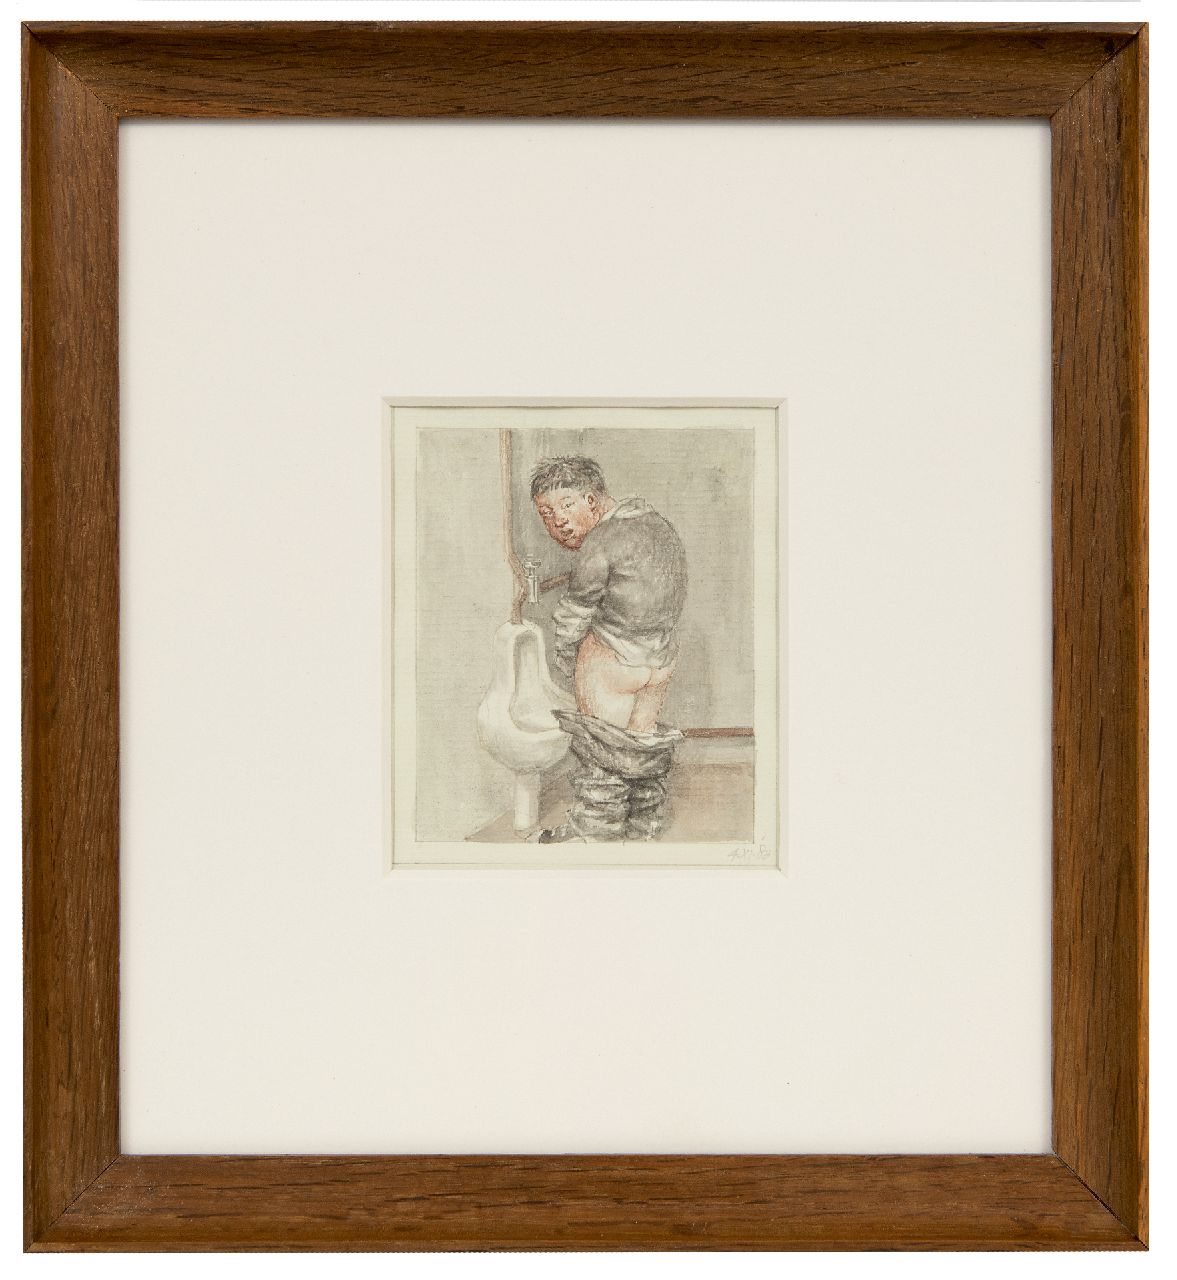 Vos P.A.C.A.  | Petrus Antonius Carolus Augustinus 'Peter' Vos | Watercolours and drawings offered for sale | Peieng man, pencil and watercolour on paper 9.2 x 7.5 cm, dated 4.XI.'83